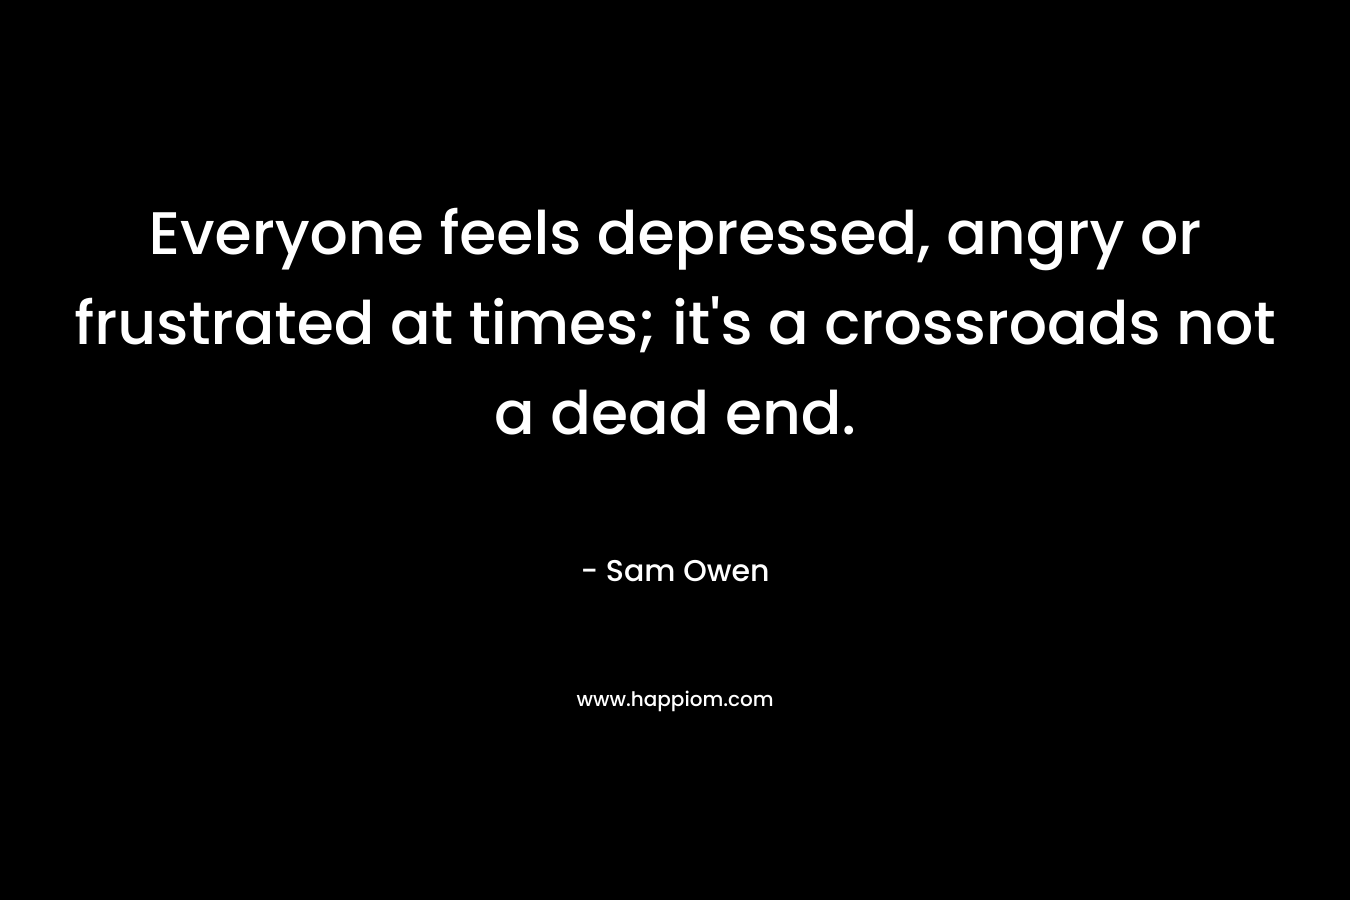 Everyone feels depressed, angry or frustrated at times; it’s a crossroads not a dead end. – Sam Owen